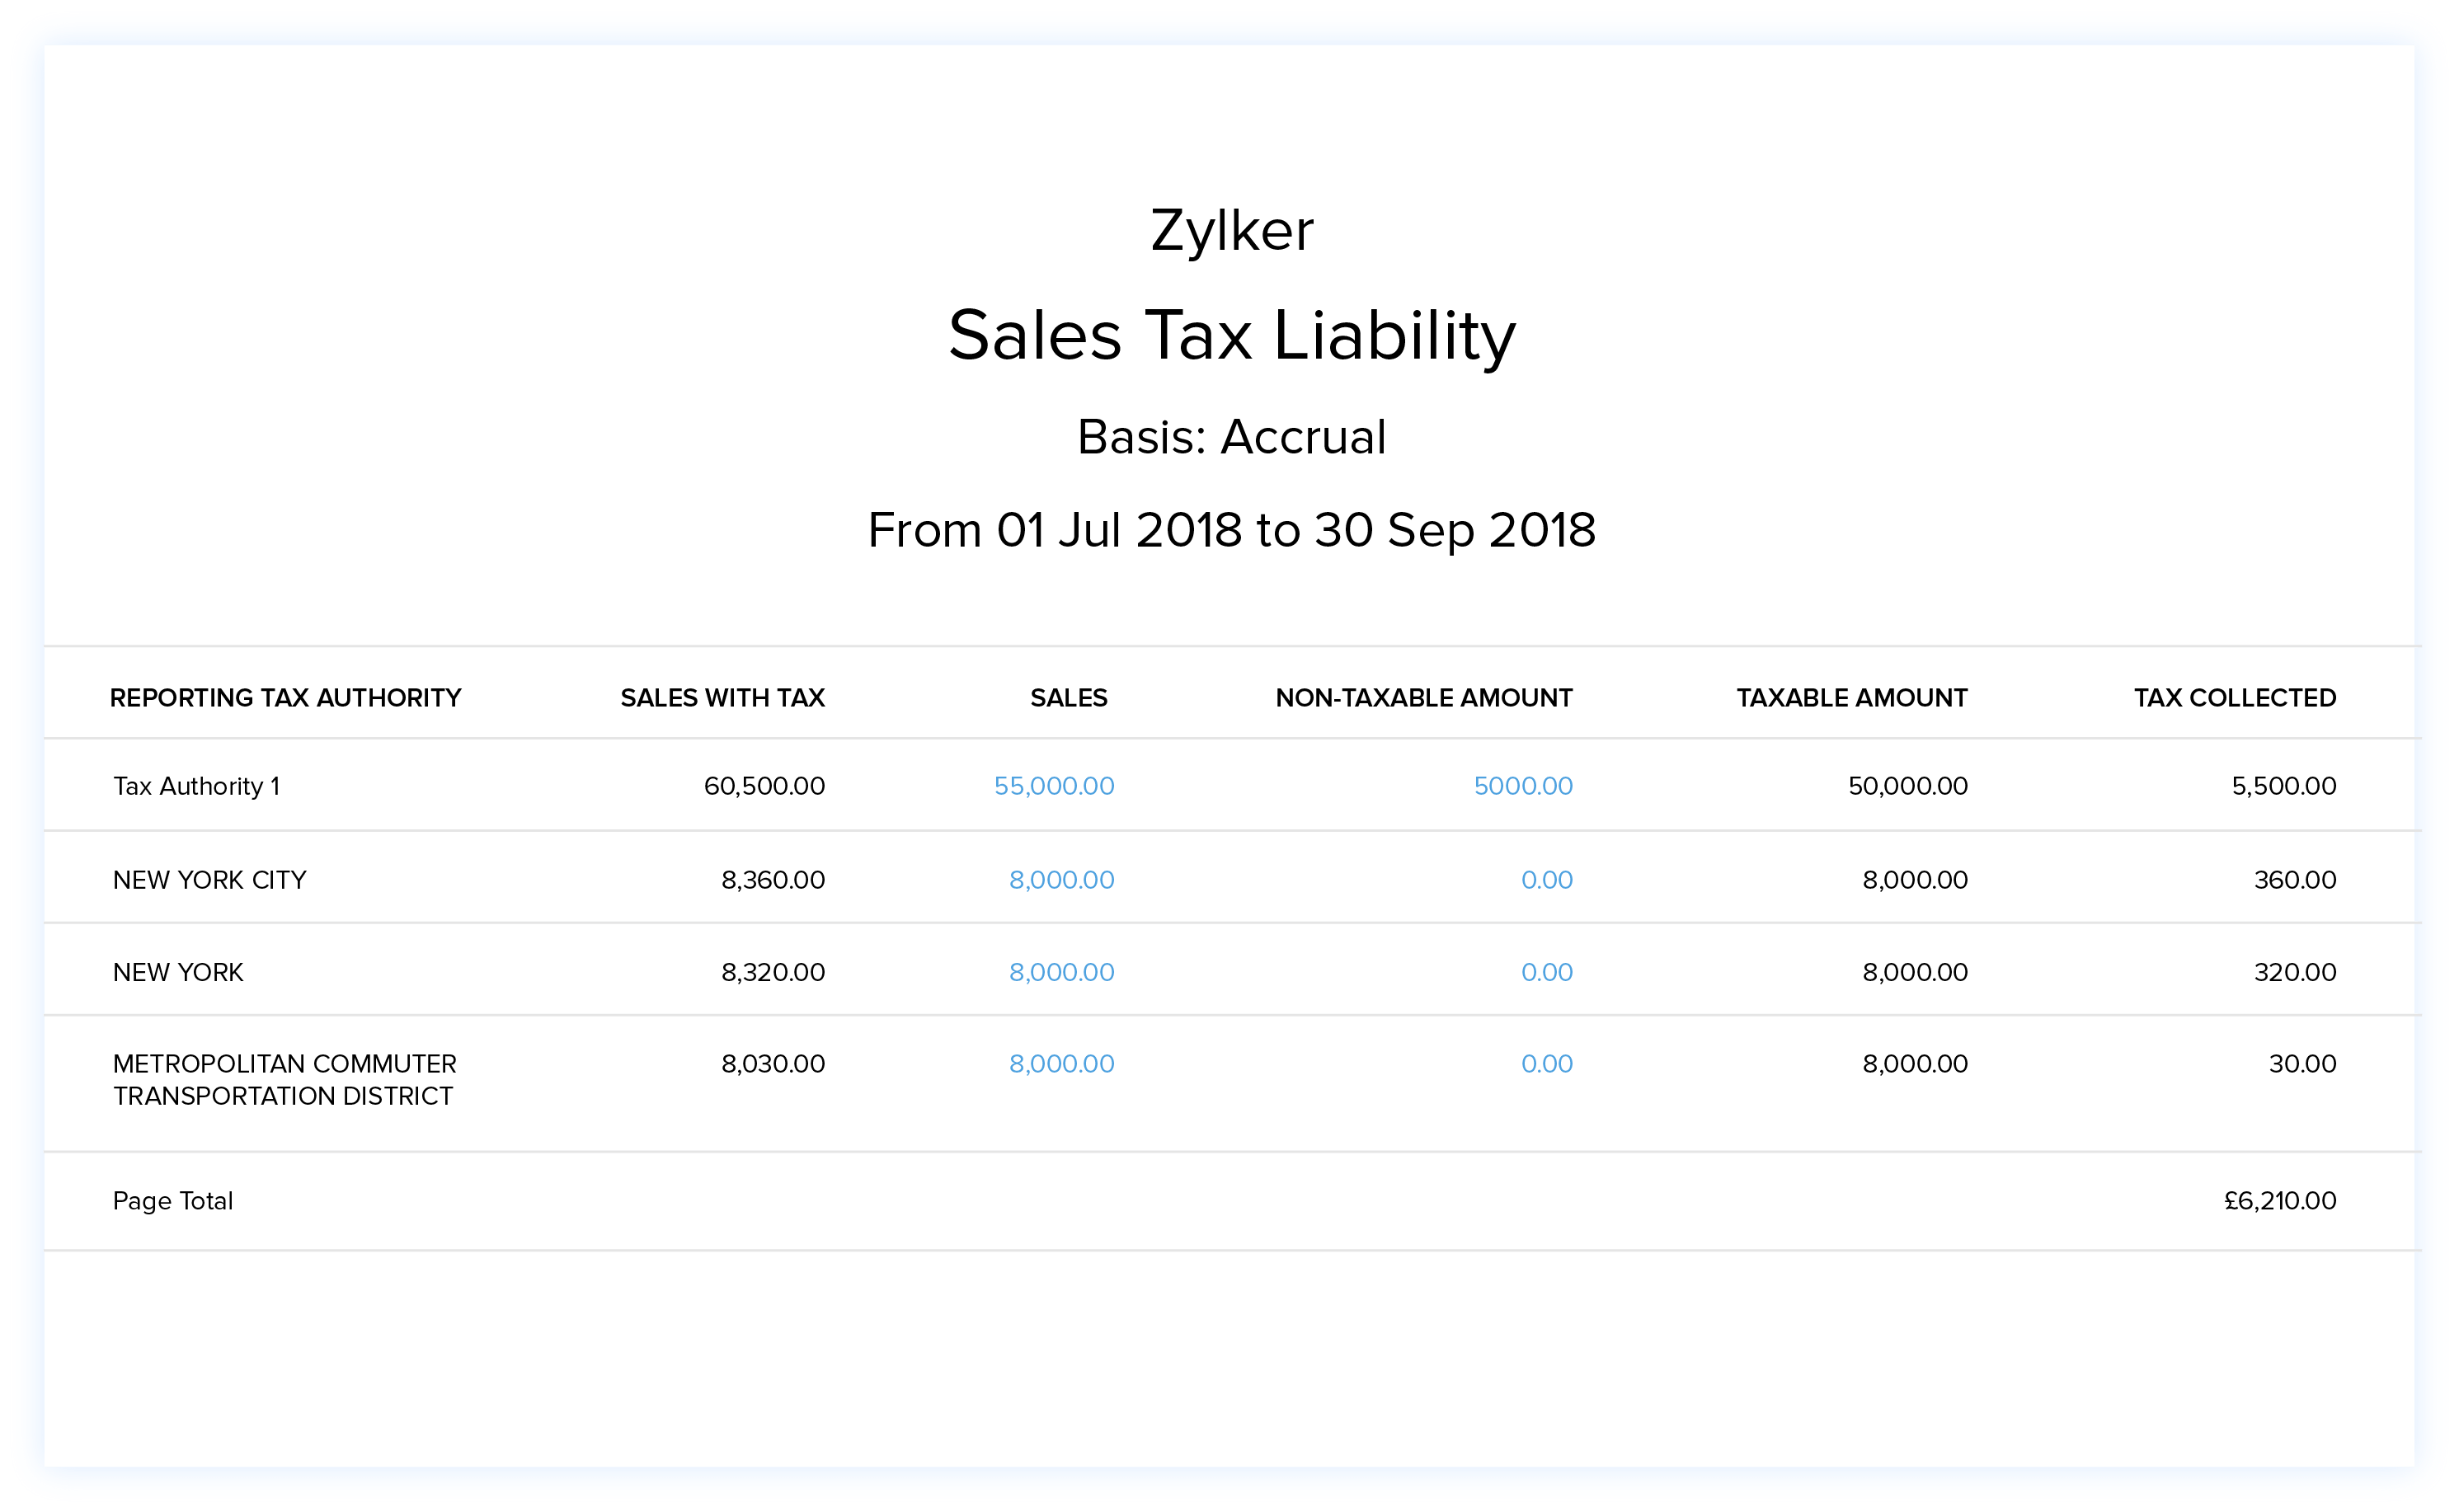 Find your sales tax liability